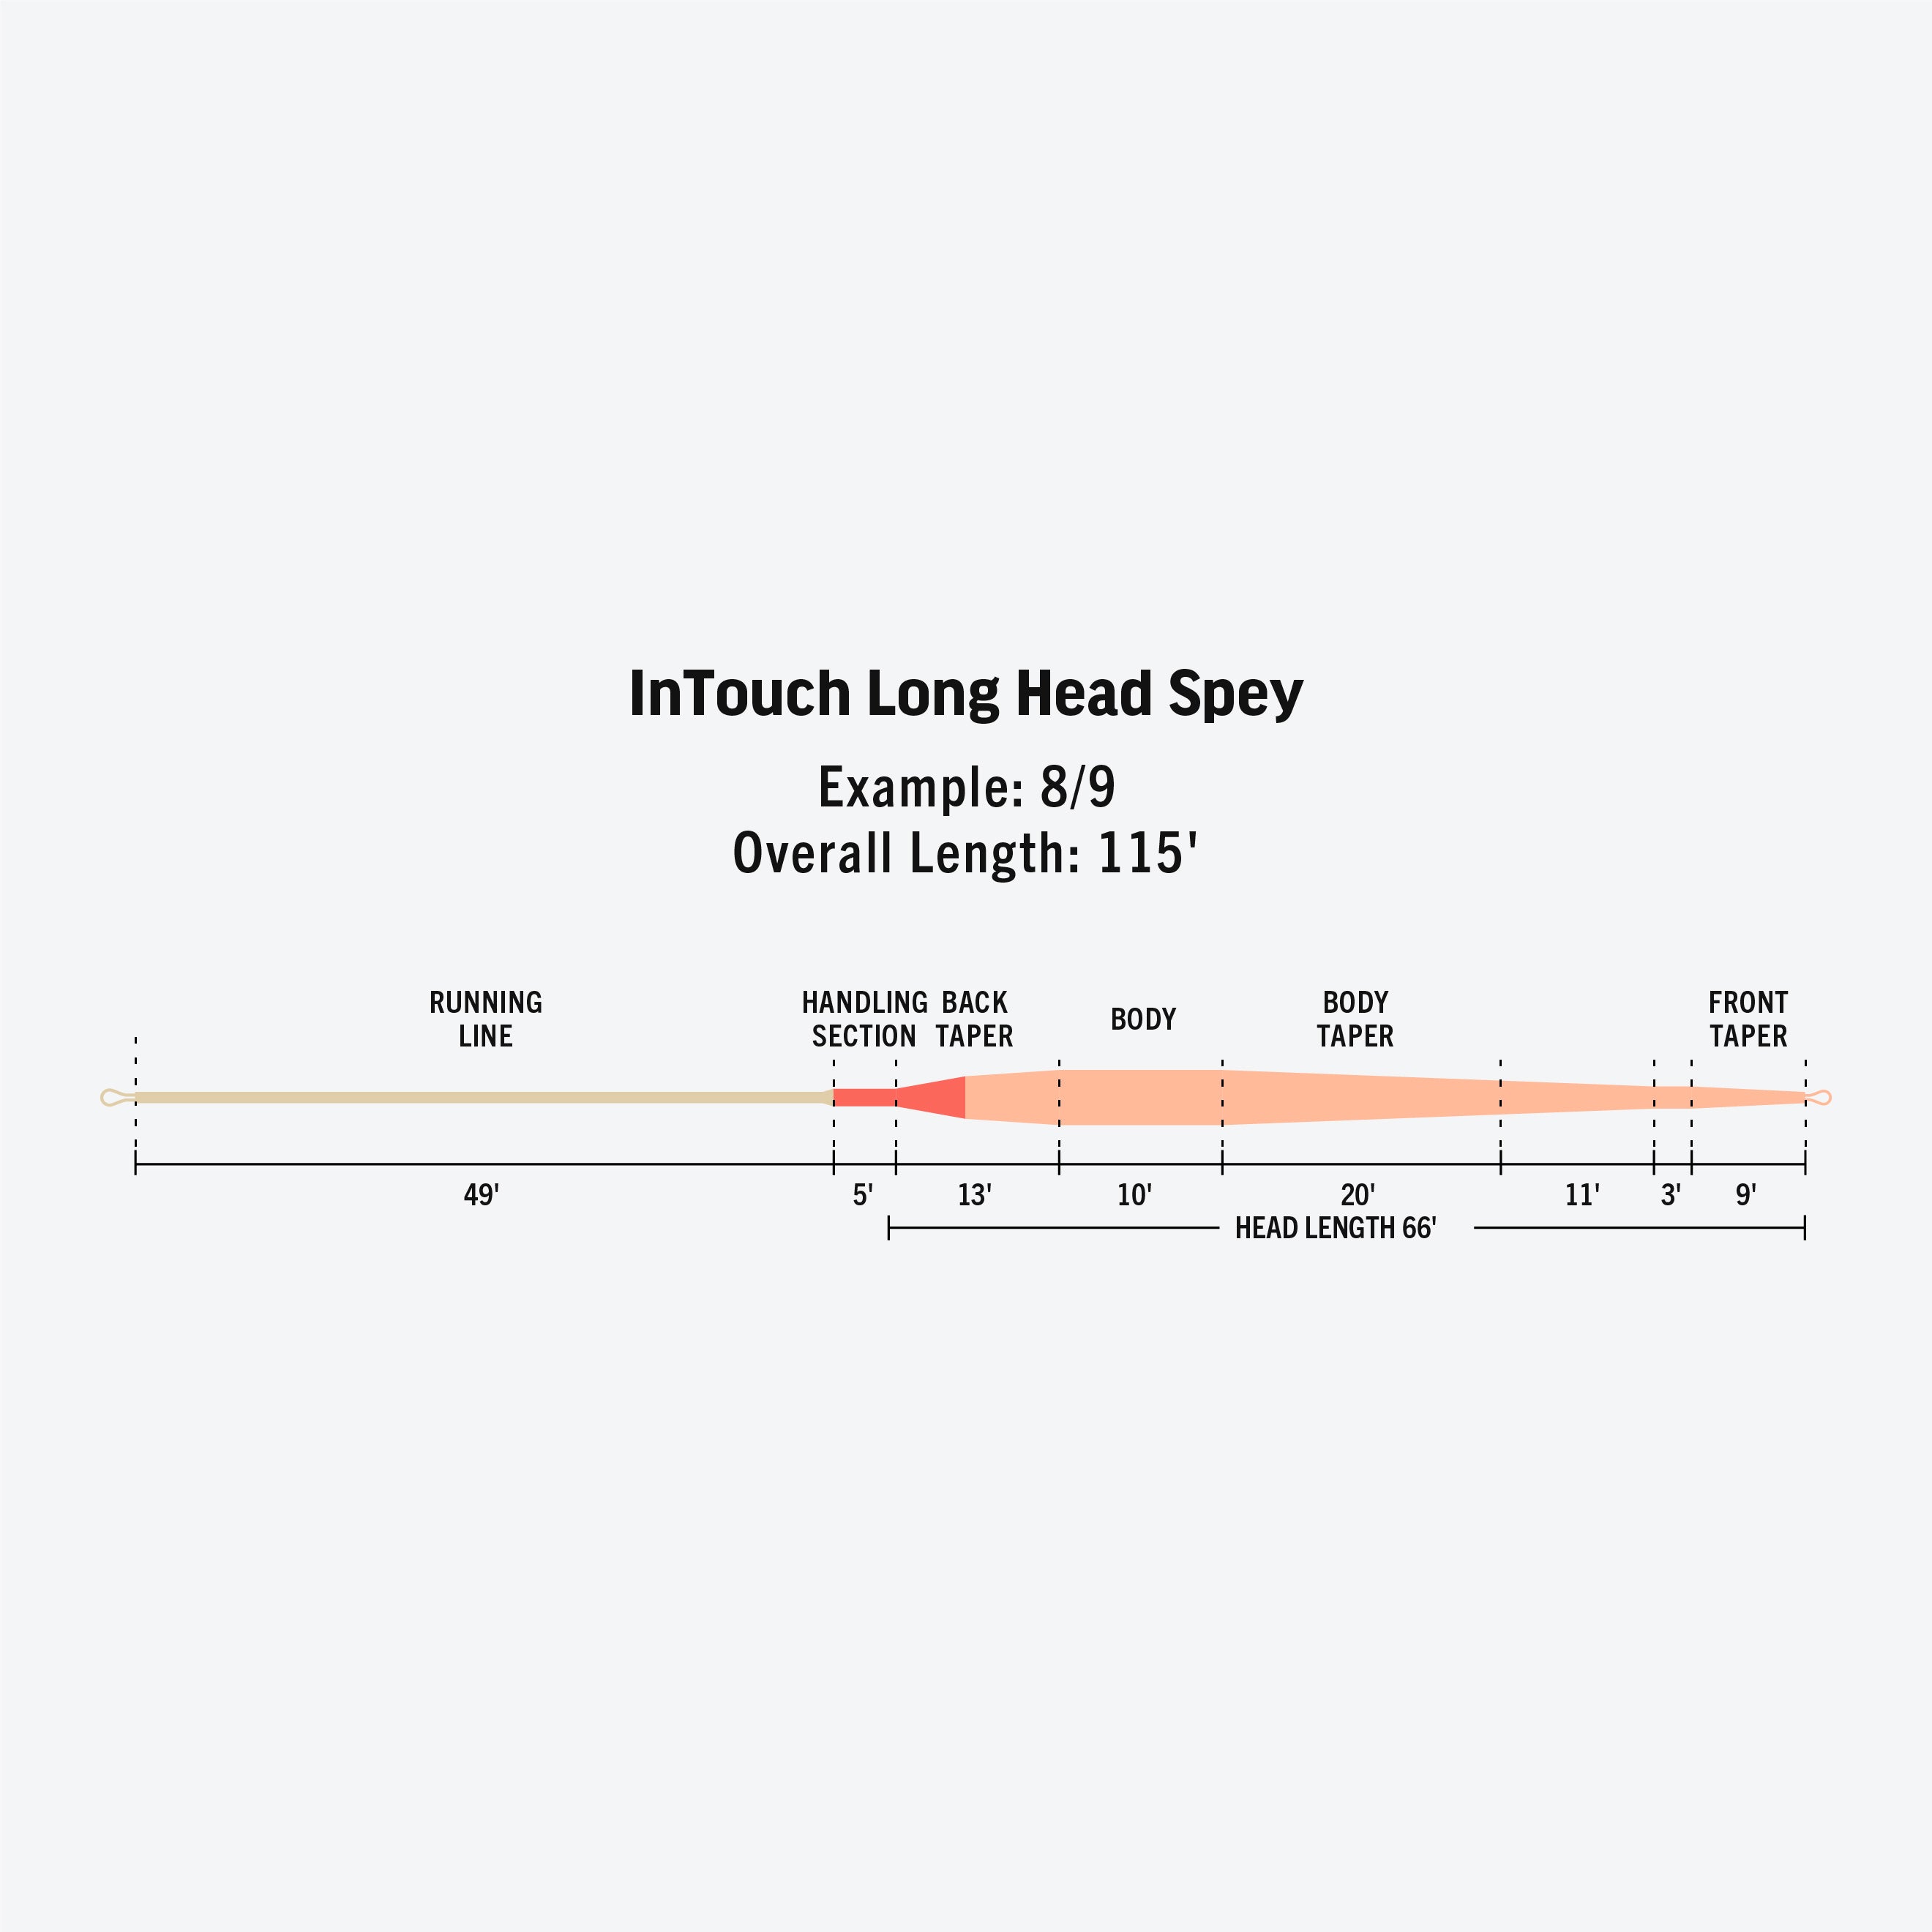 InTouch Long Head Spey